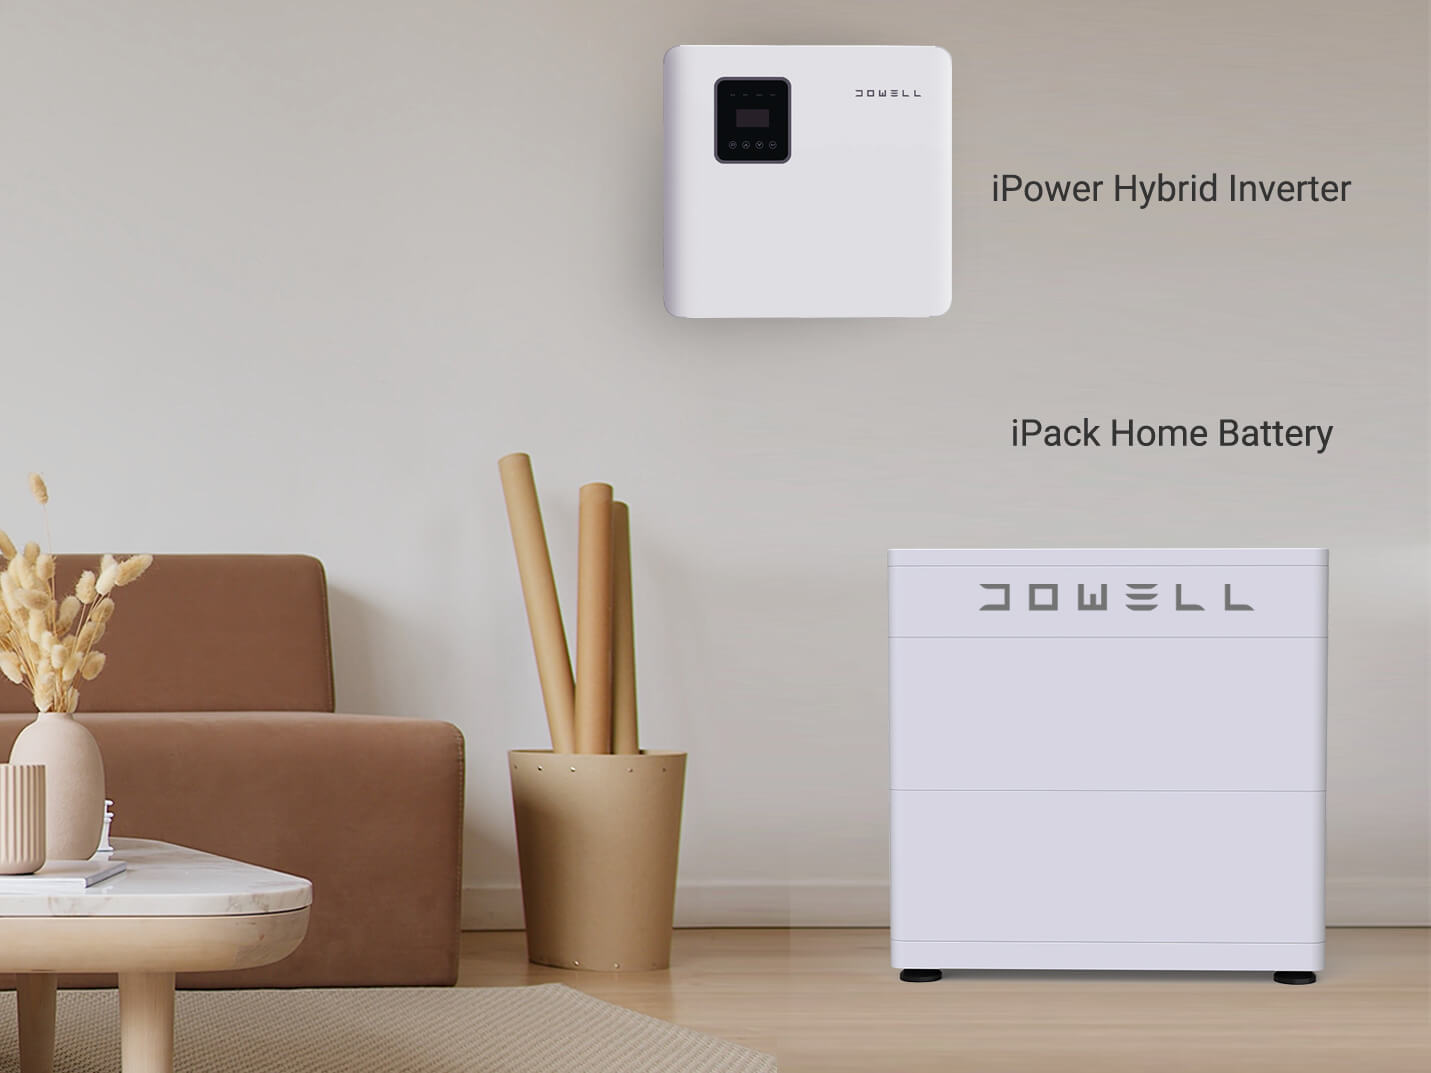 home battery storage system iPack